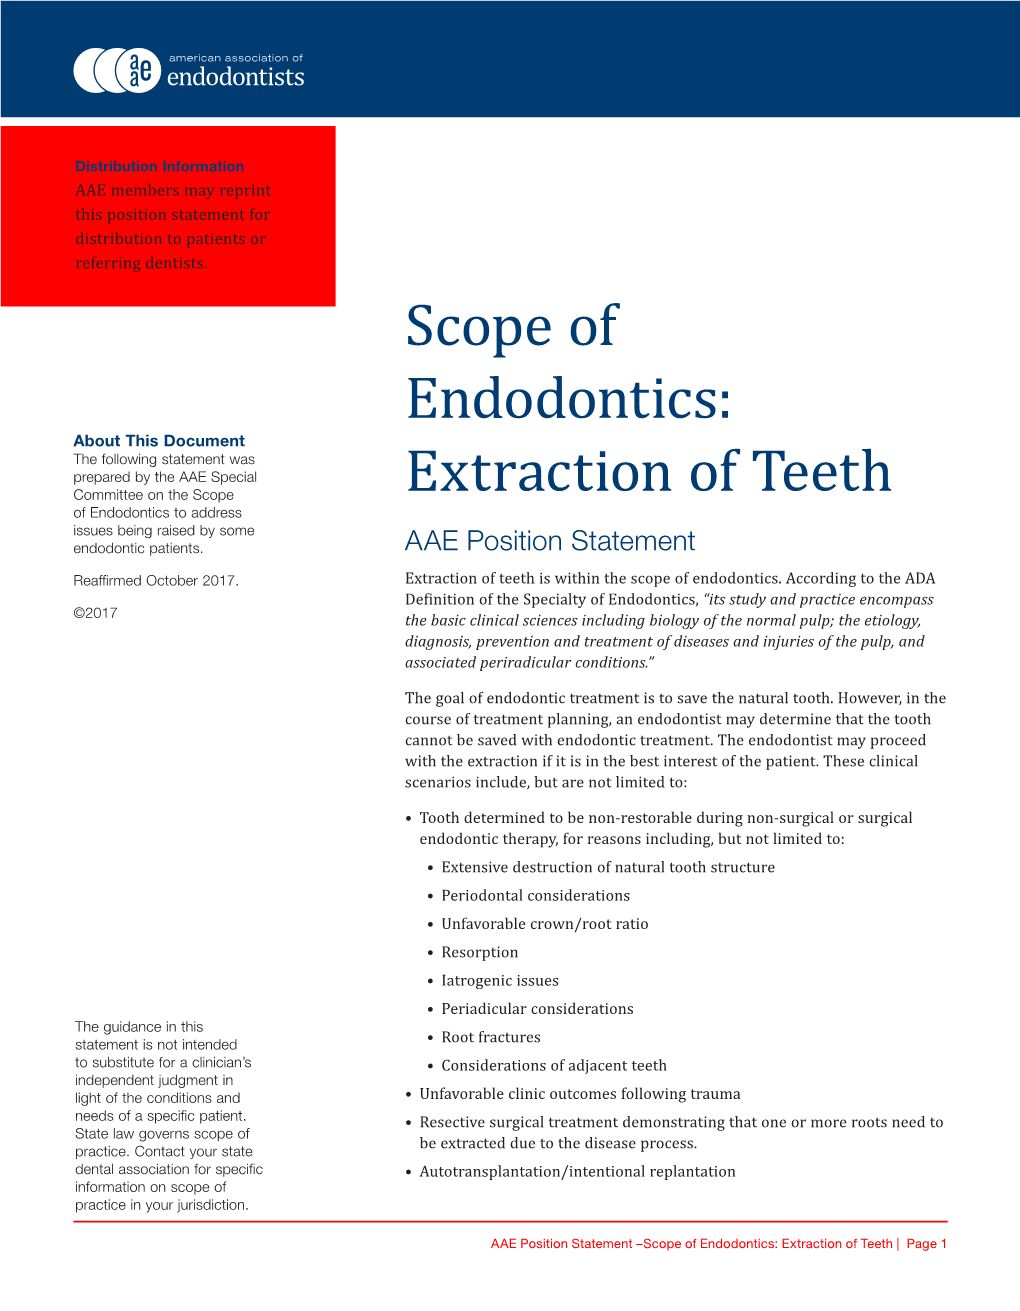 Extraction of Teeth of Endodontics to Address Issues Being Raised by Some Endodontic Patients